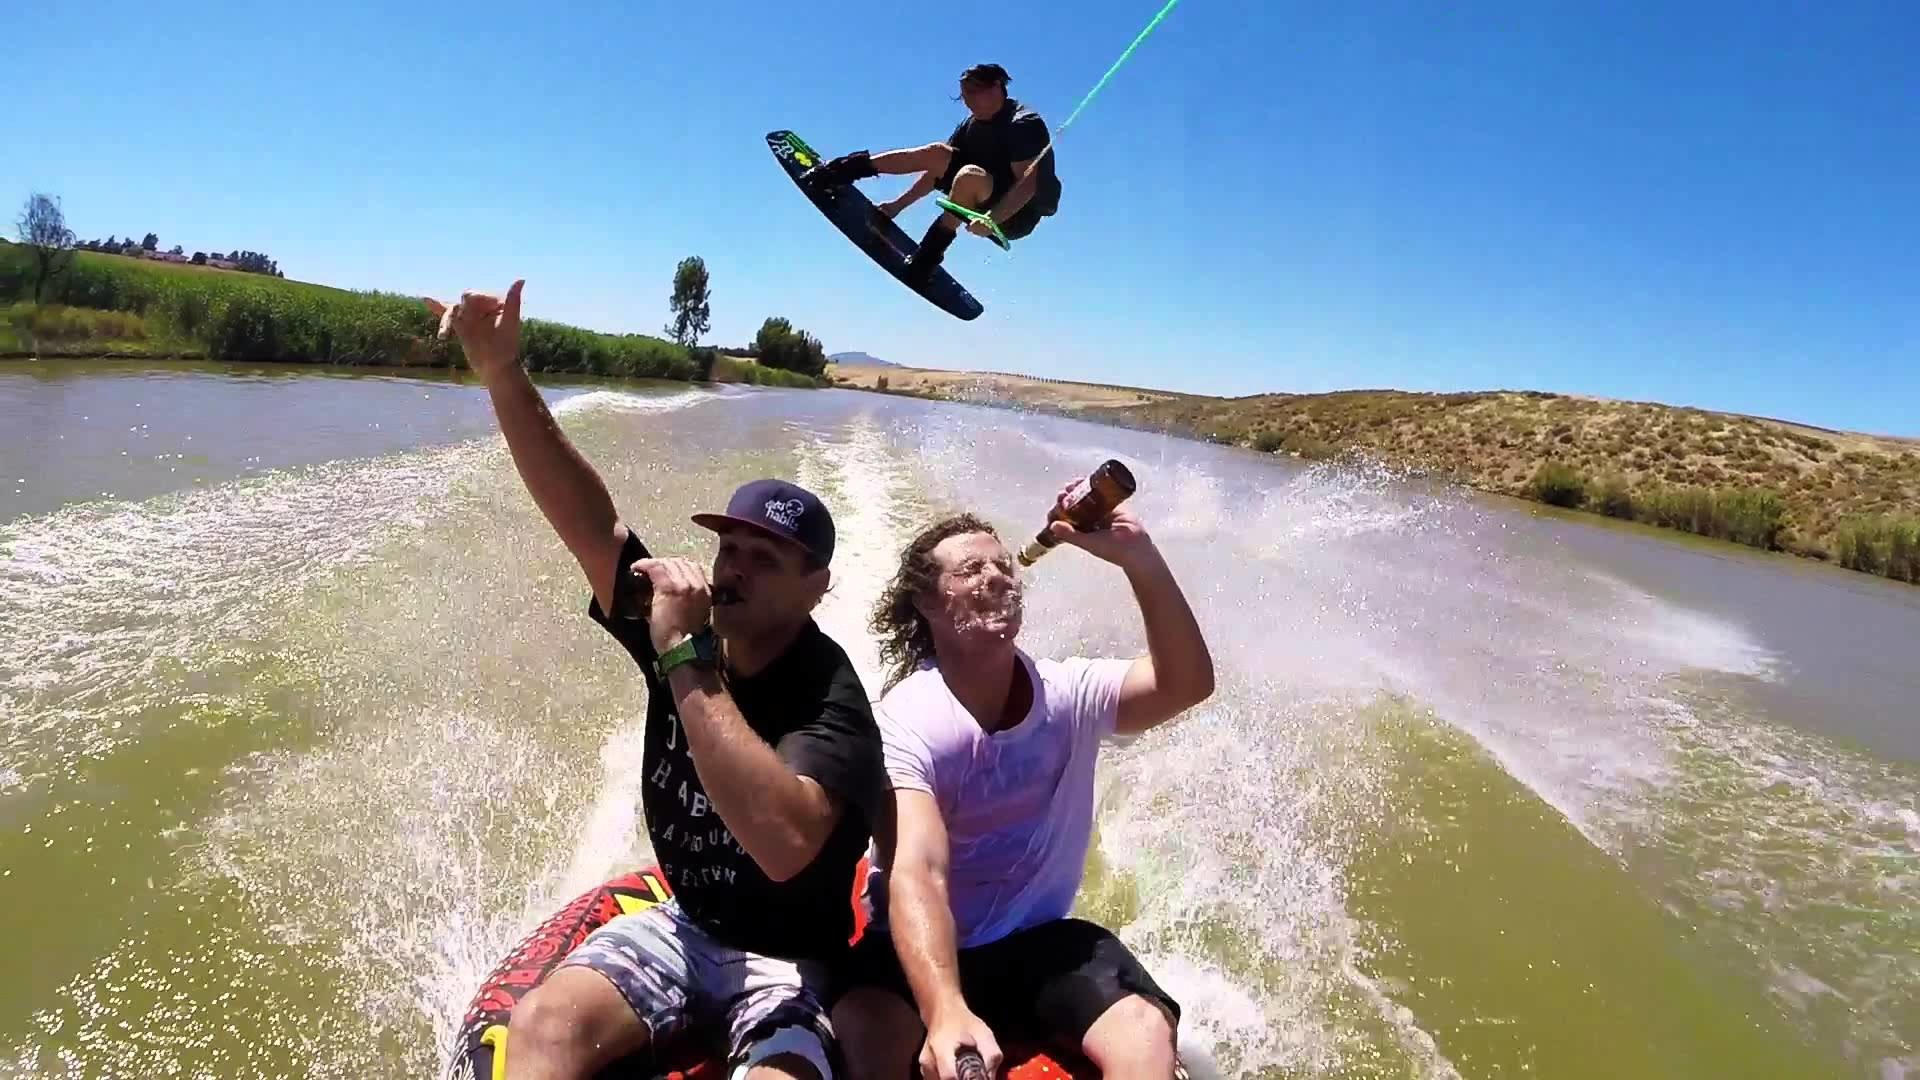 1920x1080 Dirty Habits - Wakeboarding with paintball guns and beers - Ep 3